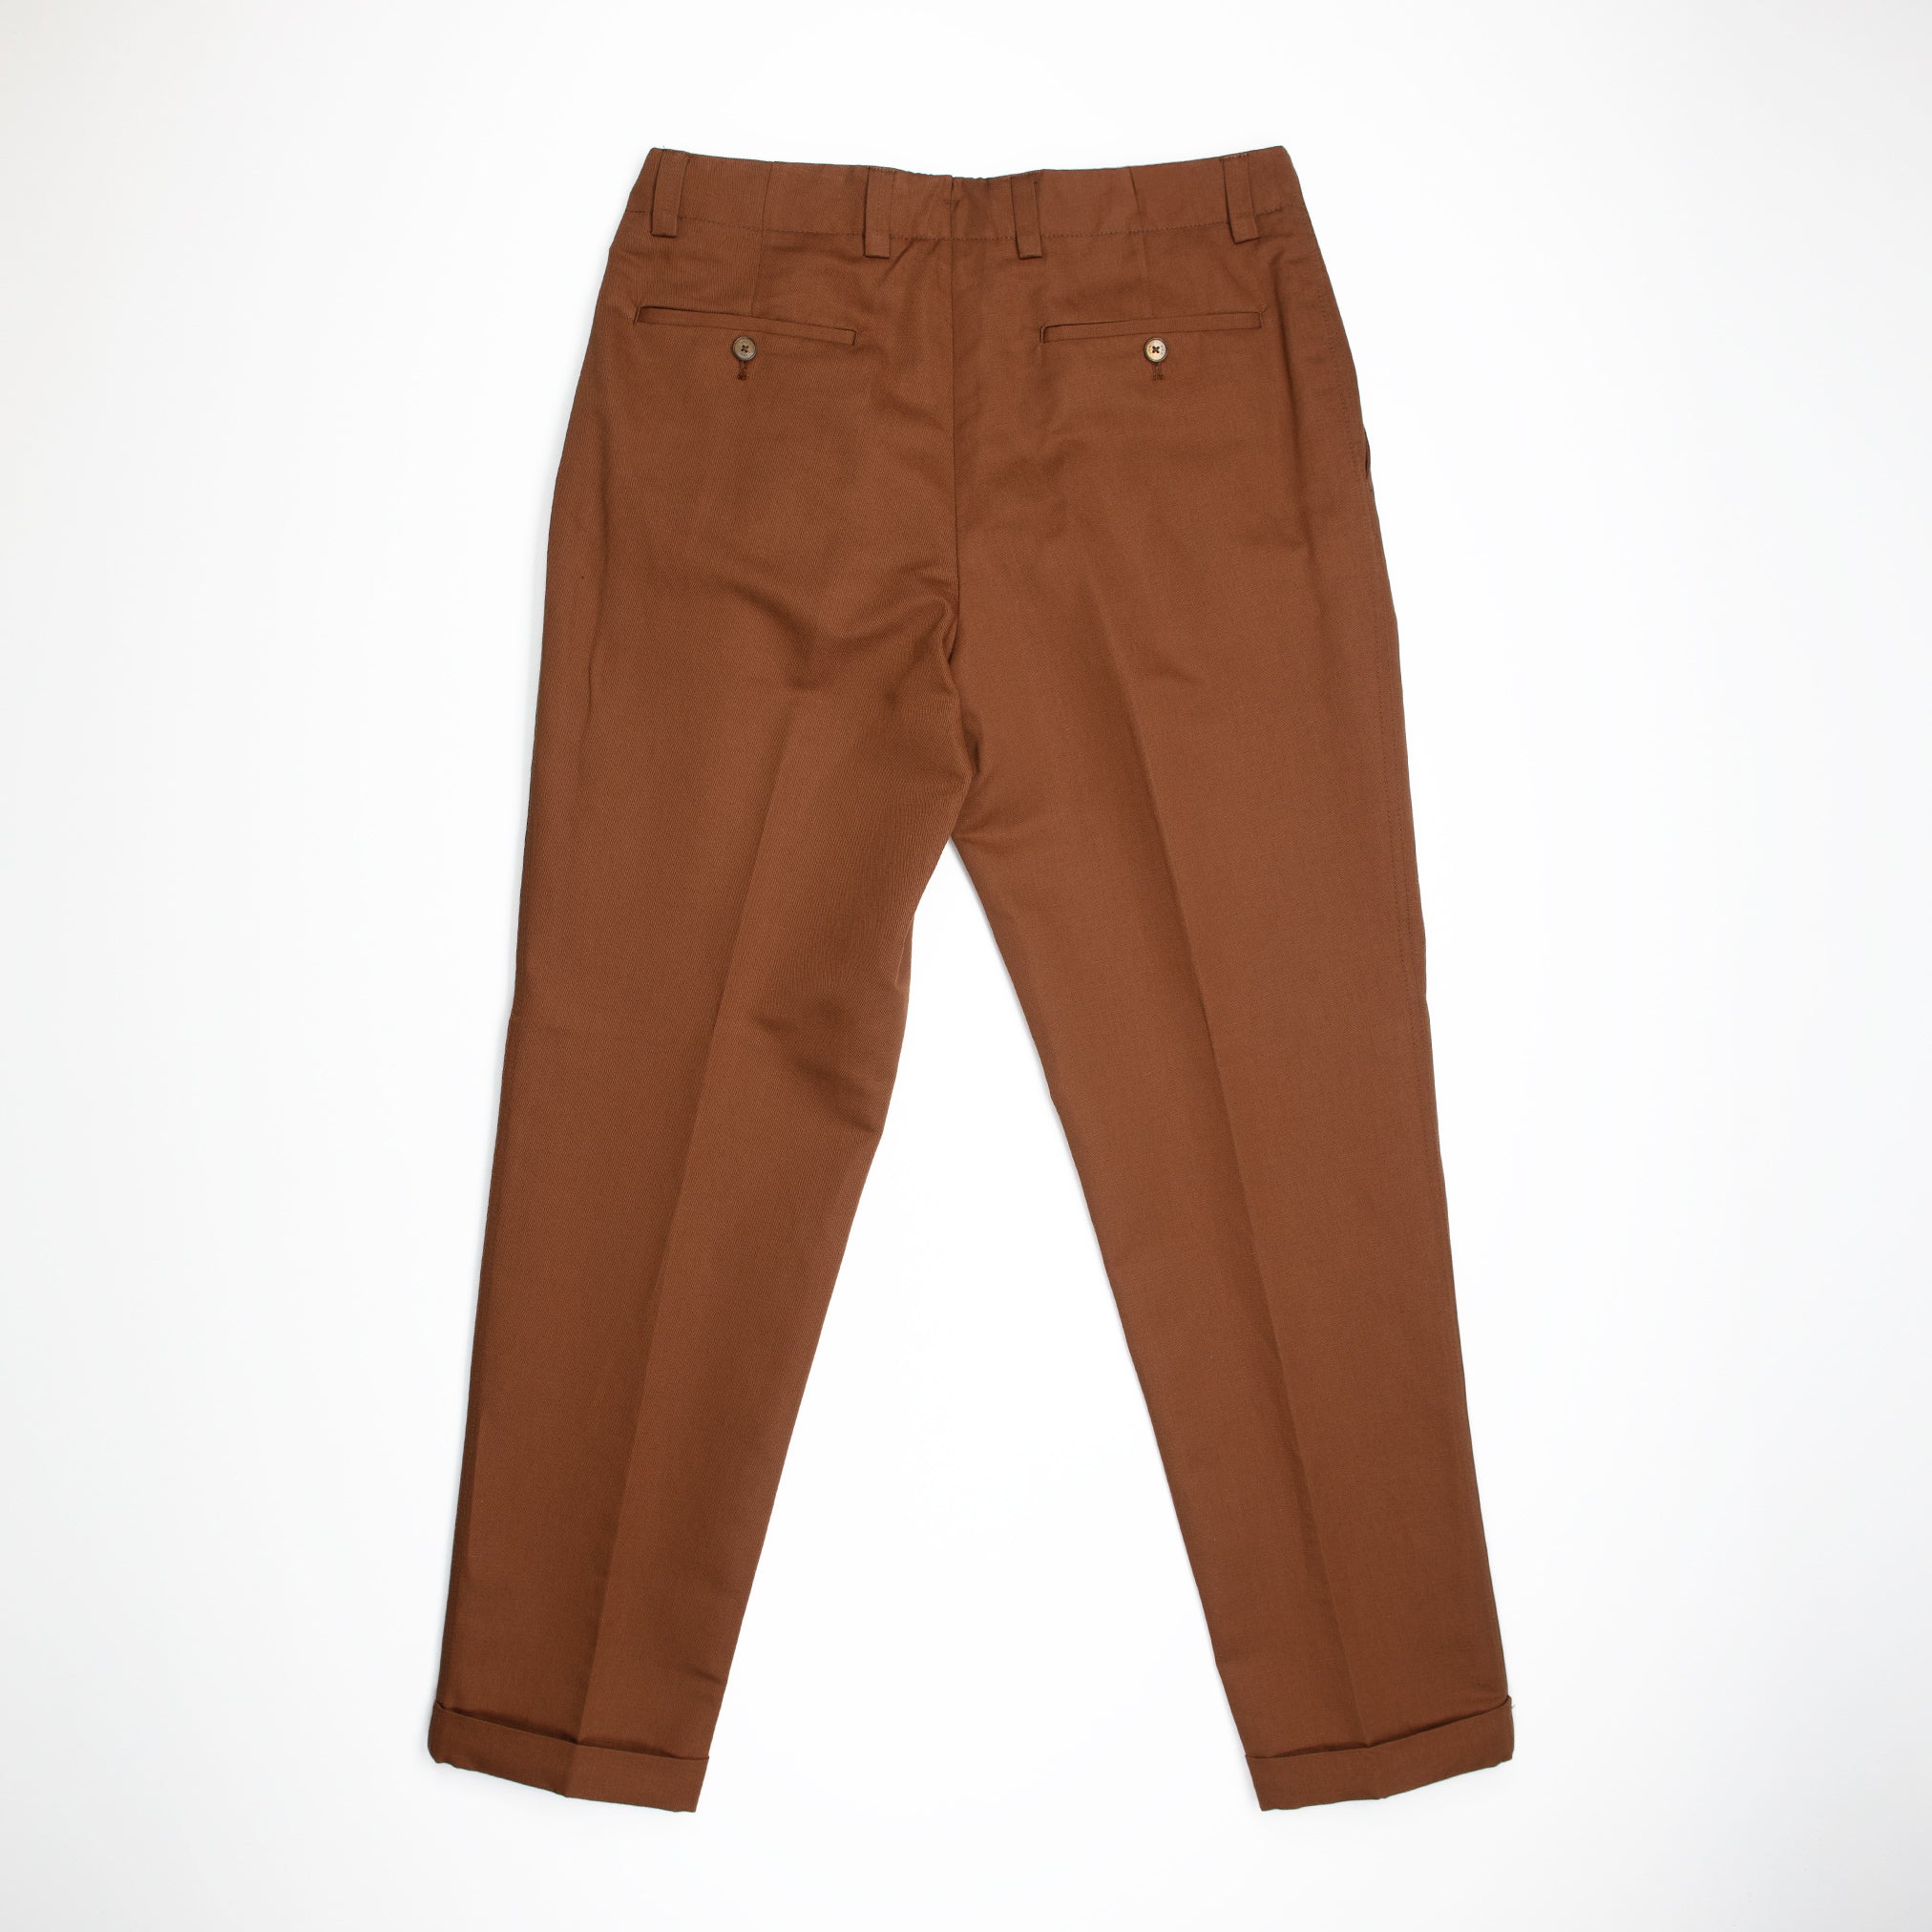 Cardiff Cotton & Linen Pants in Biscuit